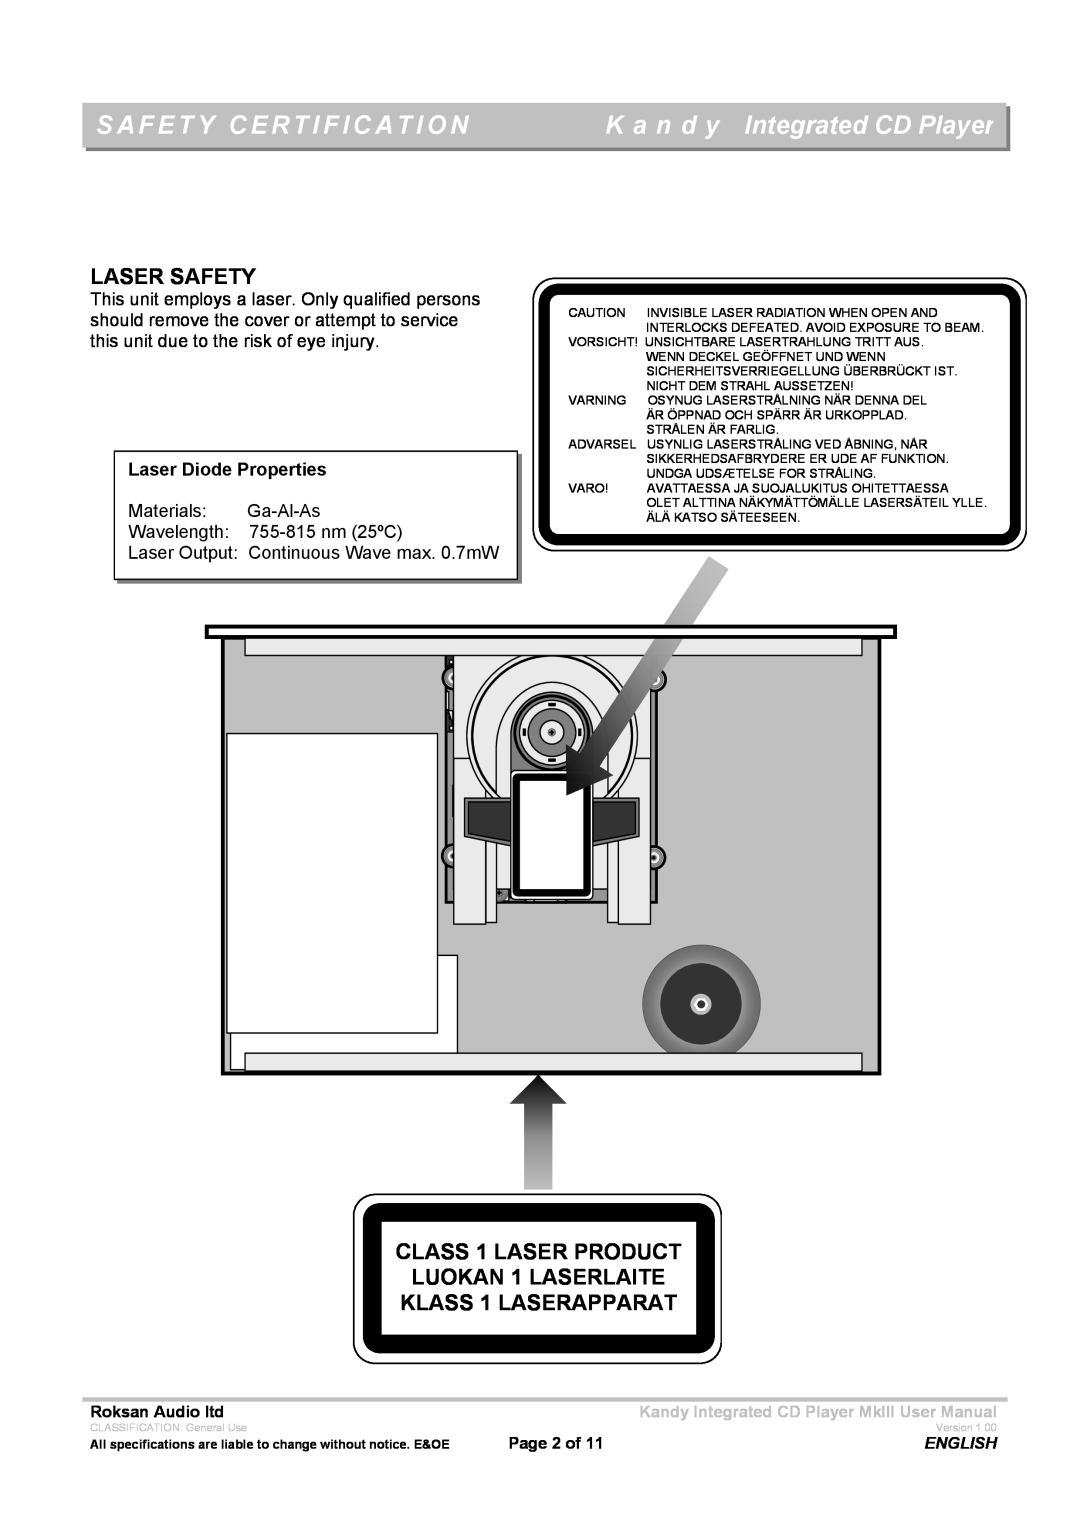 Roksan Audio MK111 Safety Certification, K a n d y Integrated CD Player, Laser Safety, KLASS 1 LASERAPPARAT, Page 2 of 